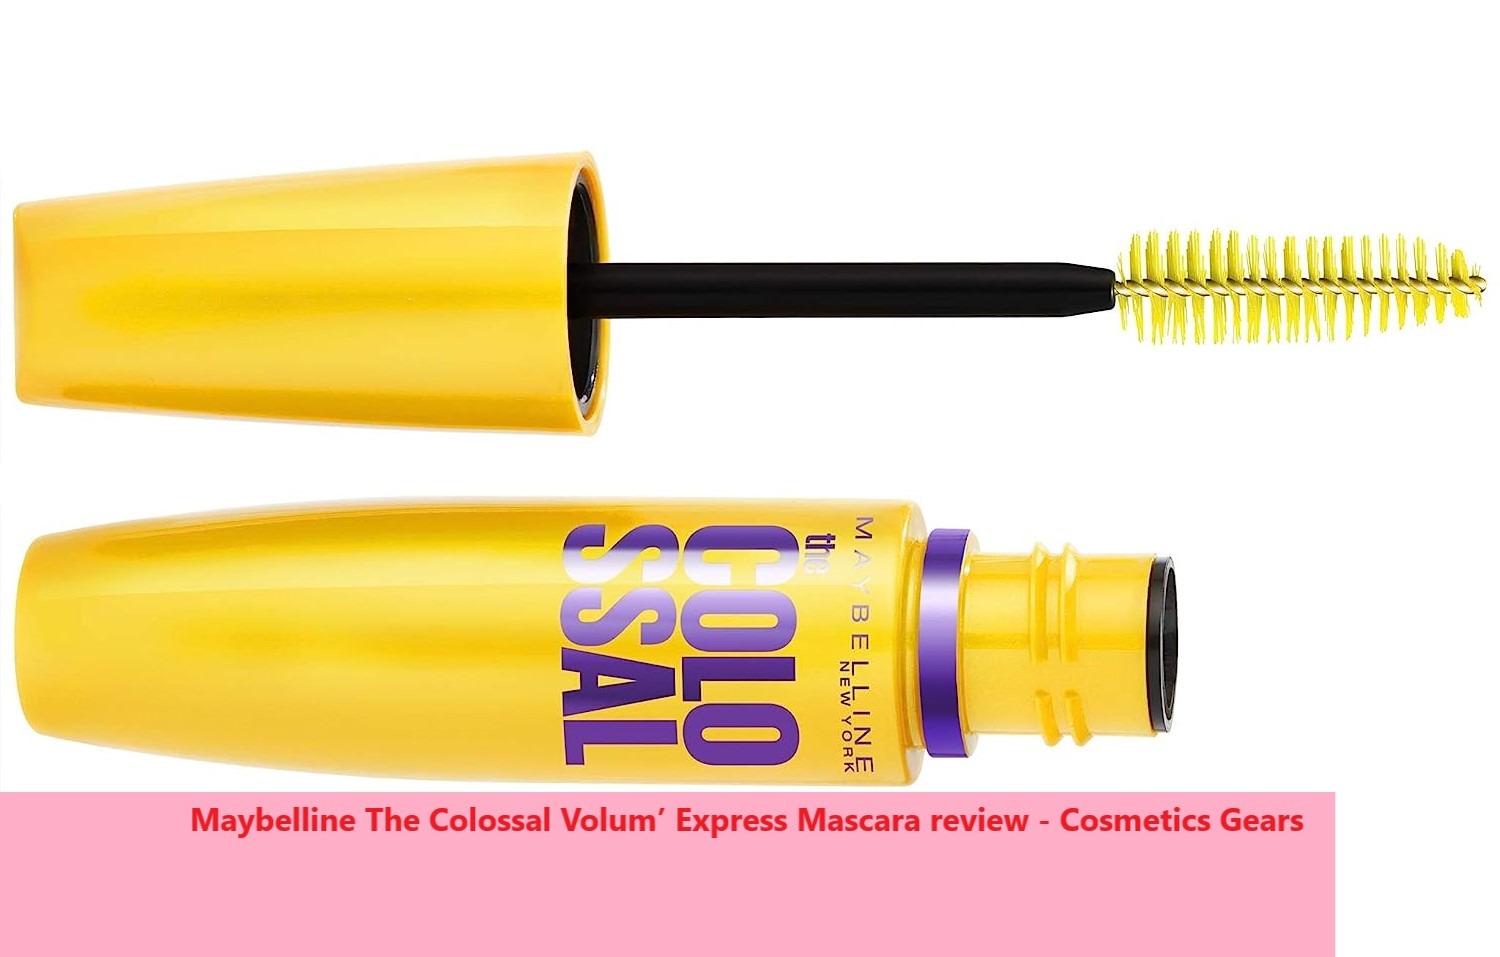 Maybelline The Colossal Volum’ Express Mascara review